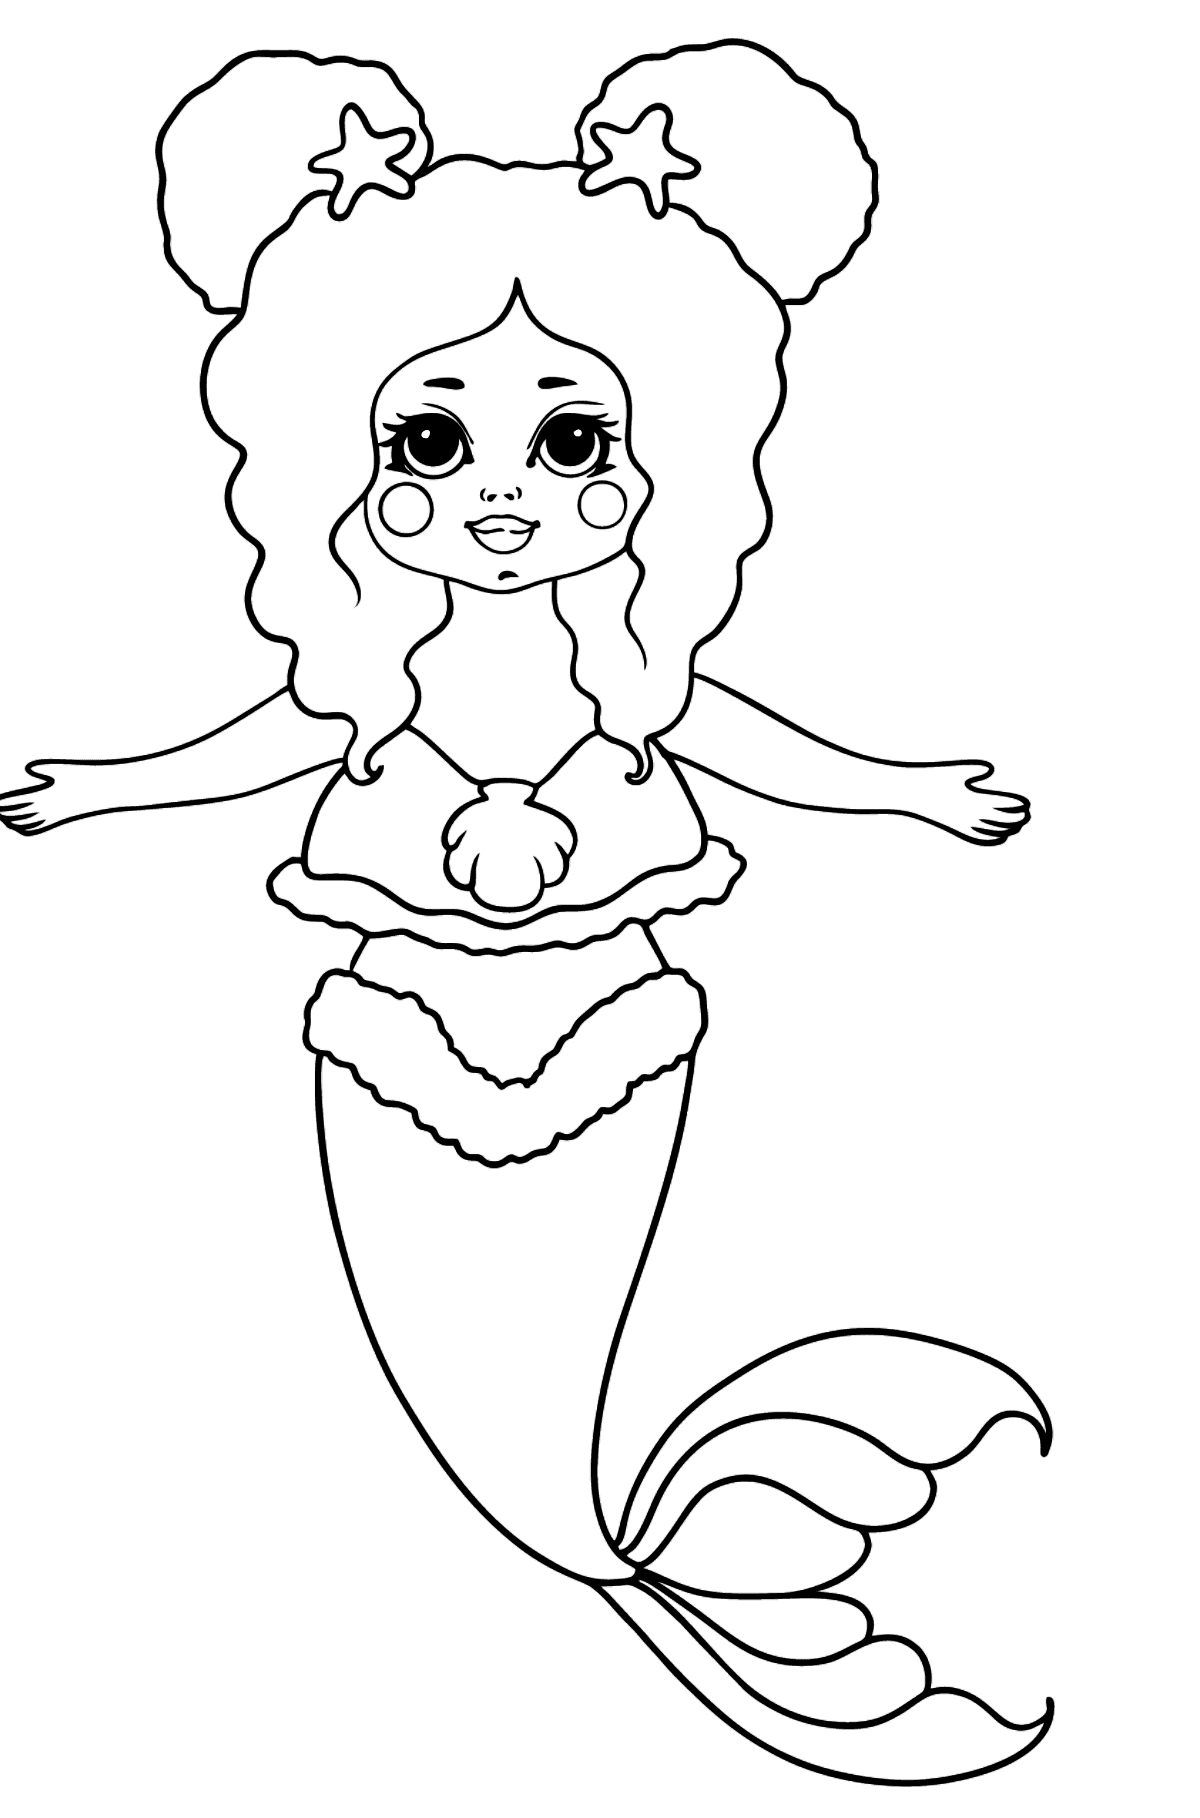 Mermaid with Yellow Tail coloring page - Coloring Pages for Kids